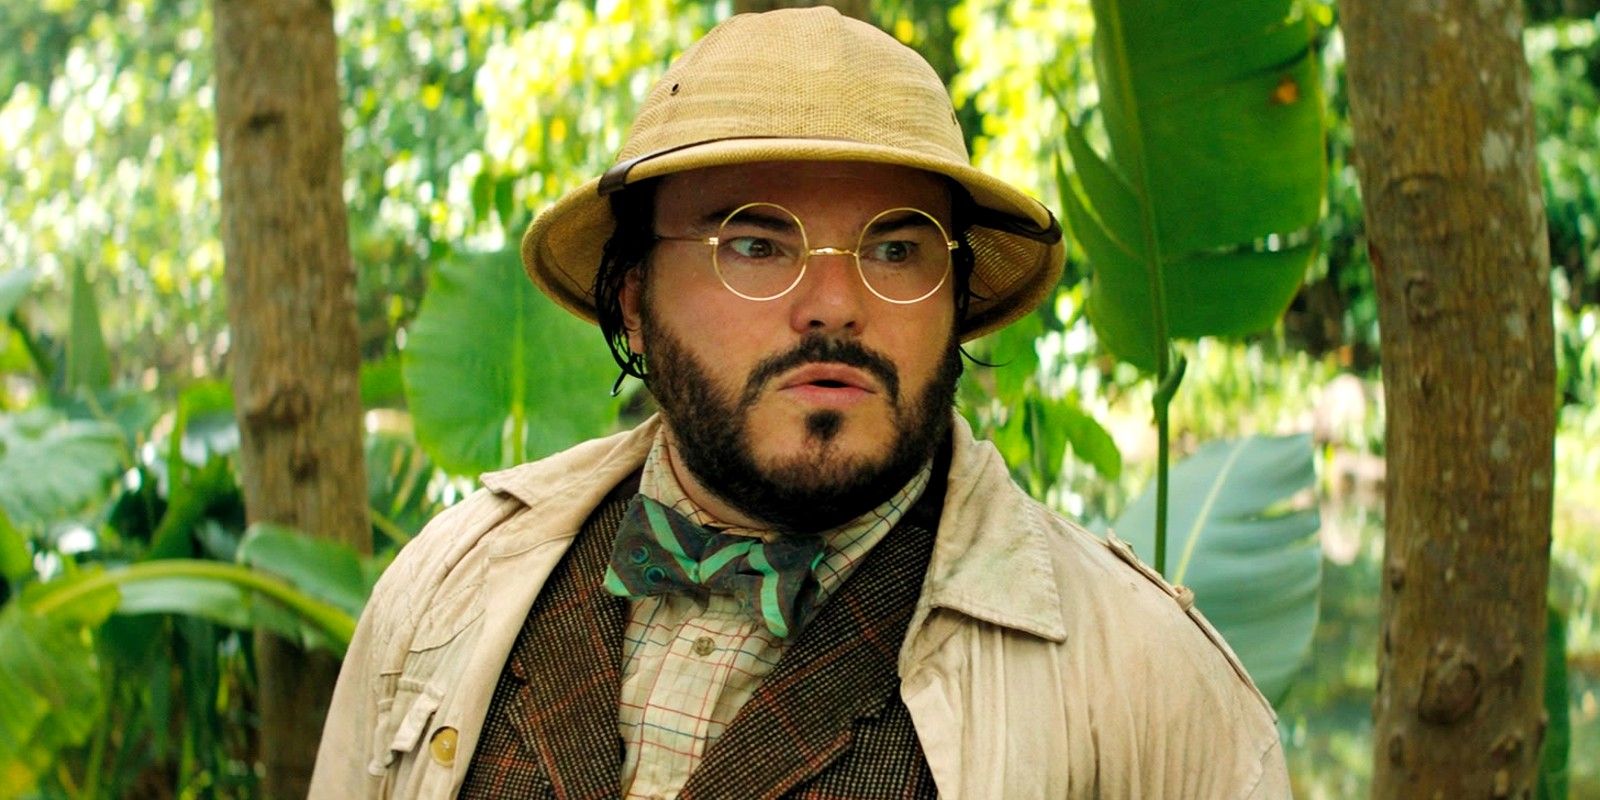 Jack Black in the forest wearing a hat and glasses In Jumanji Next Level